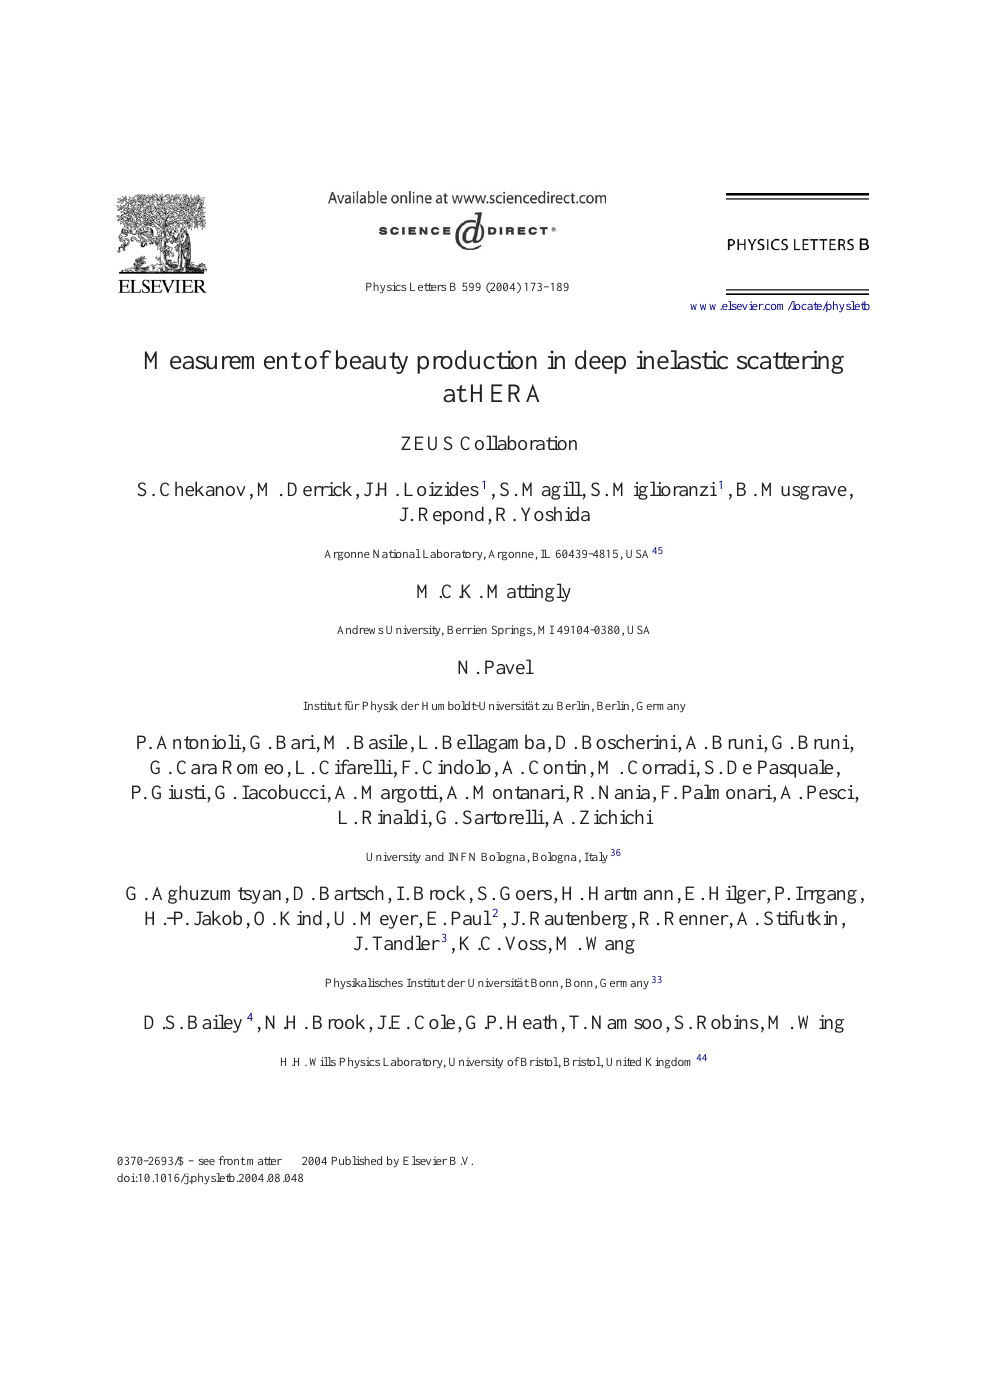 Measurement Of Beauty Production In Deep Inelastic Scattering At Hera Topic Of Research Paper In Physical Sciences Download Scholarly Article Pdf And Read For Free On Cyberleninka Open Science Hub